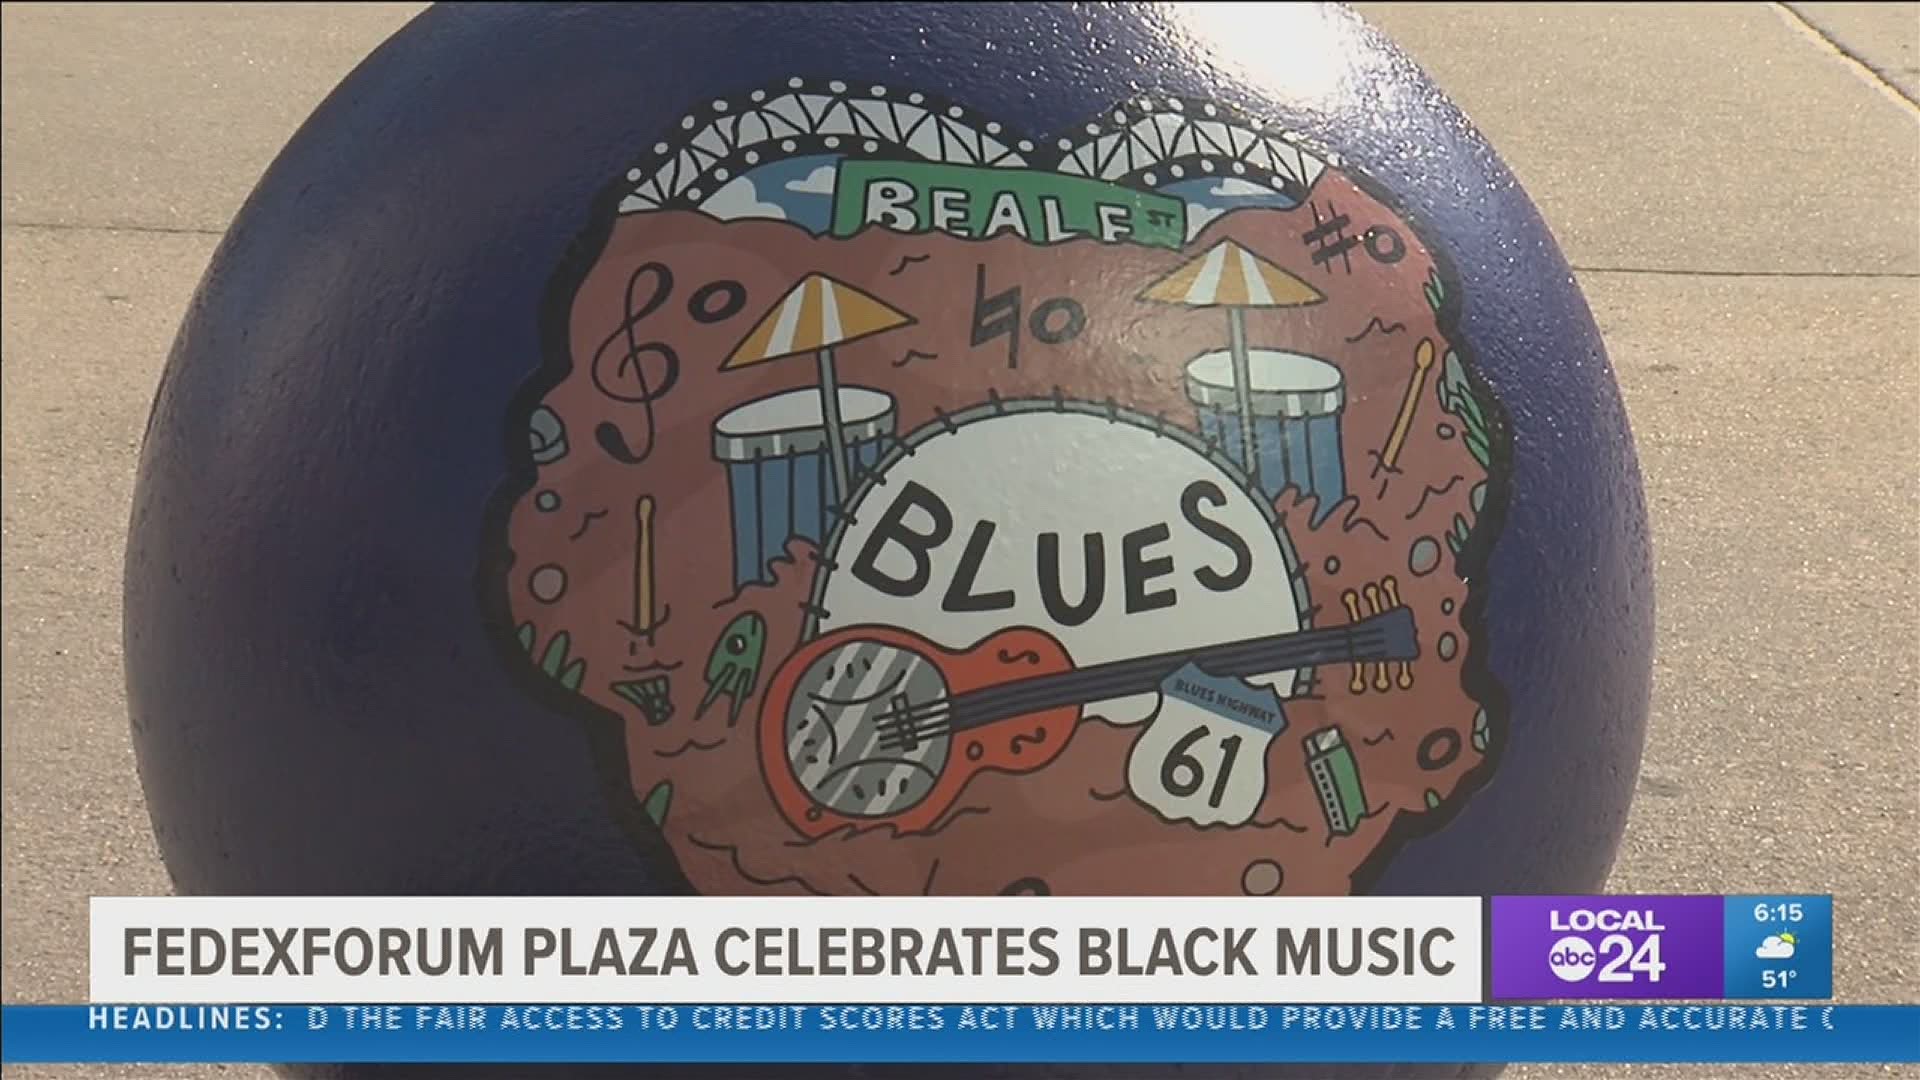 Twenty-four of the round concrete bollards that surround the FedExForum Plaza are painted in celebration of Black music in Memphis history.